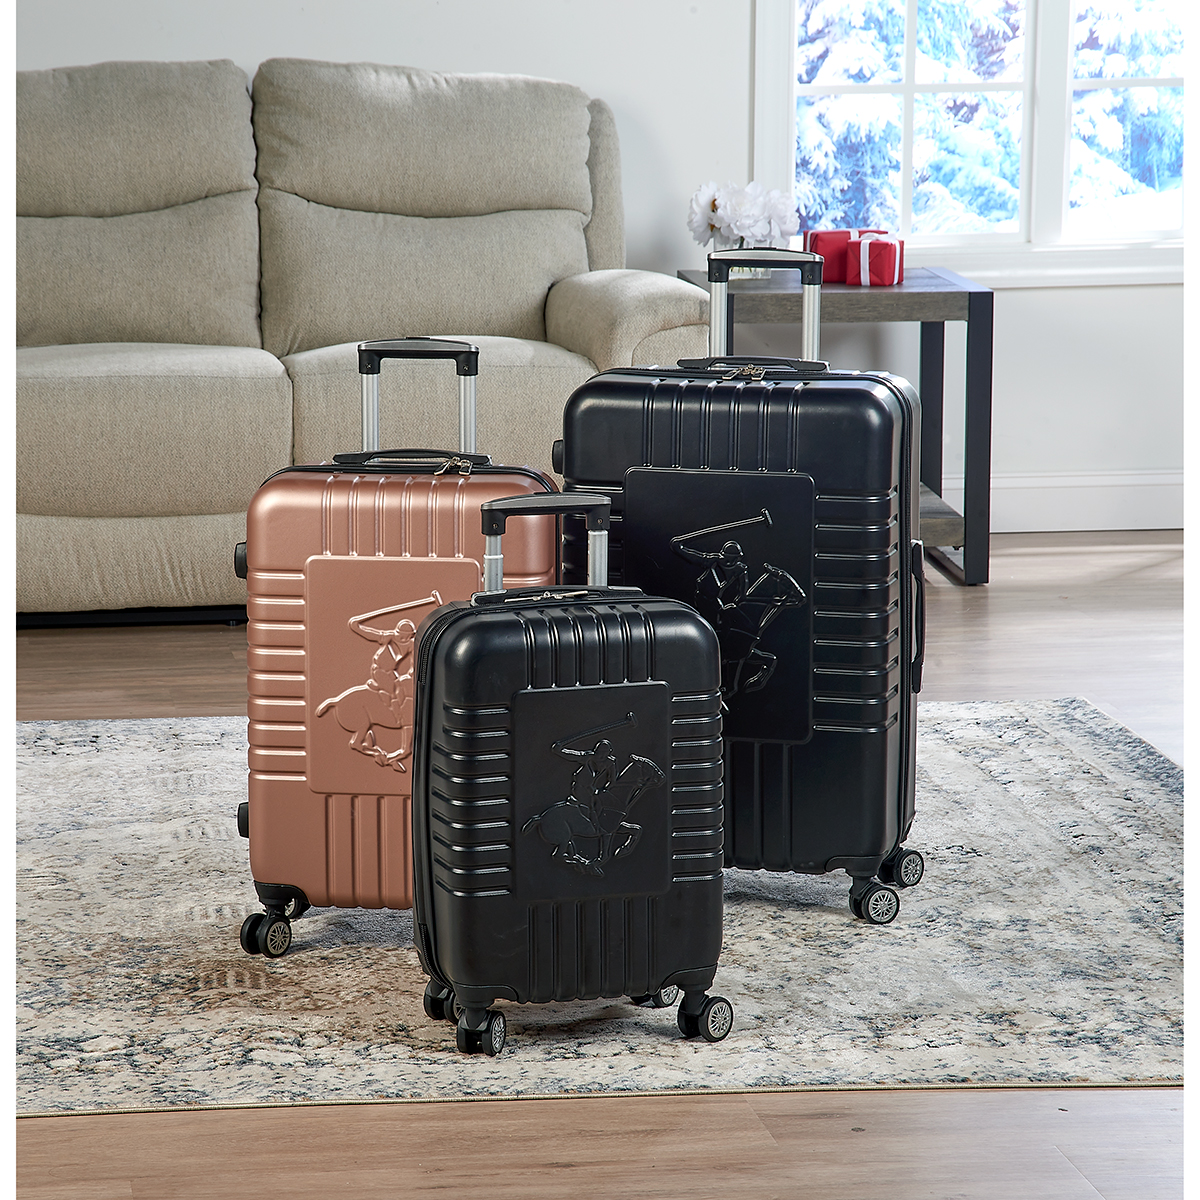 Beverly Hills Polo Club 24in. Hardside Spinner Luggage